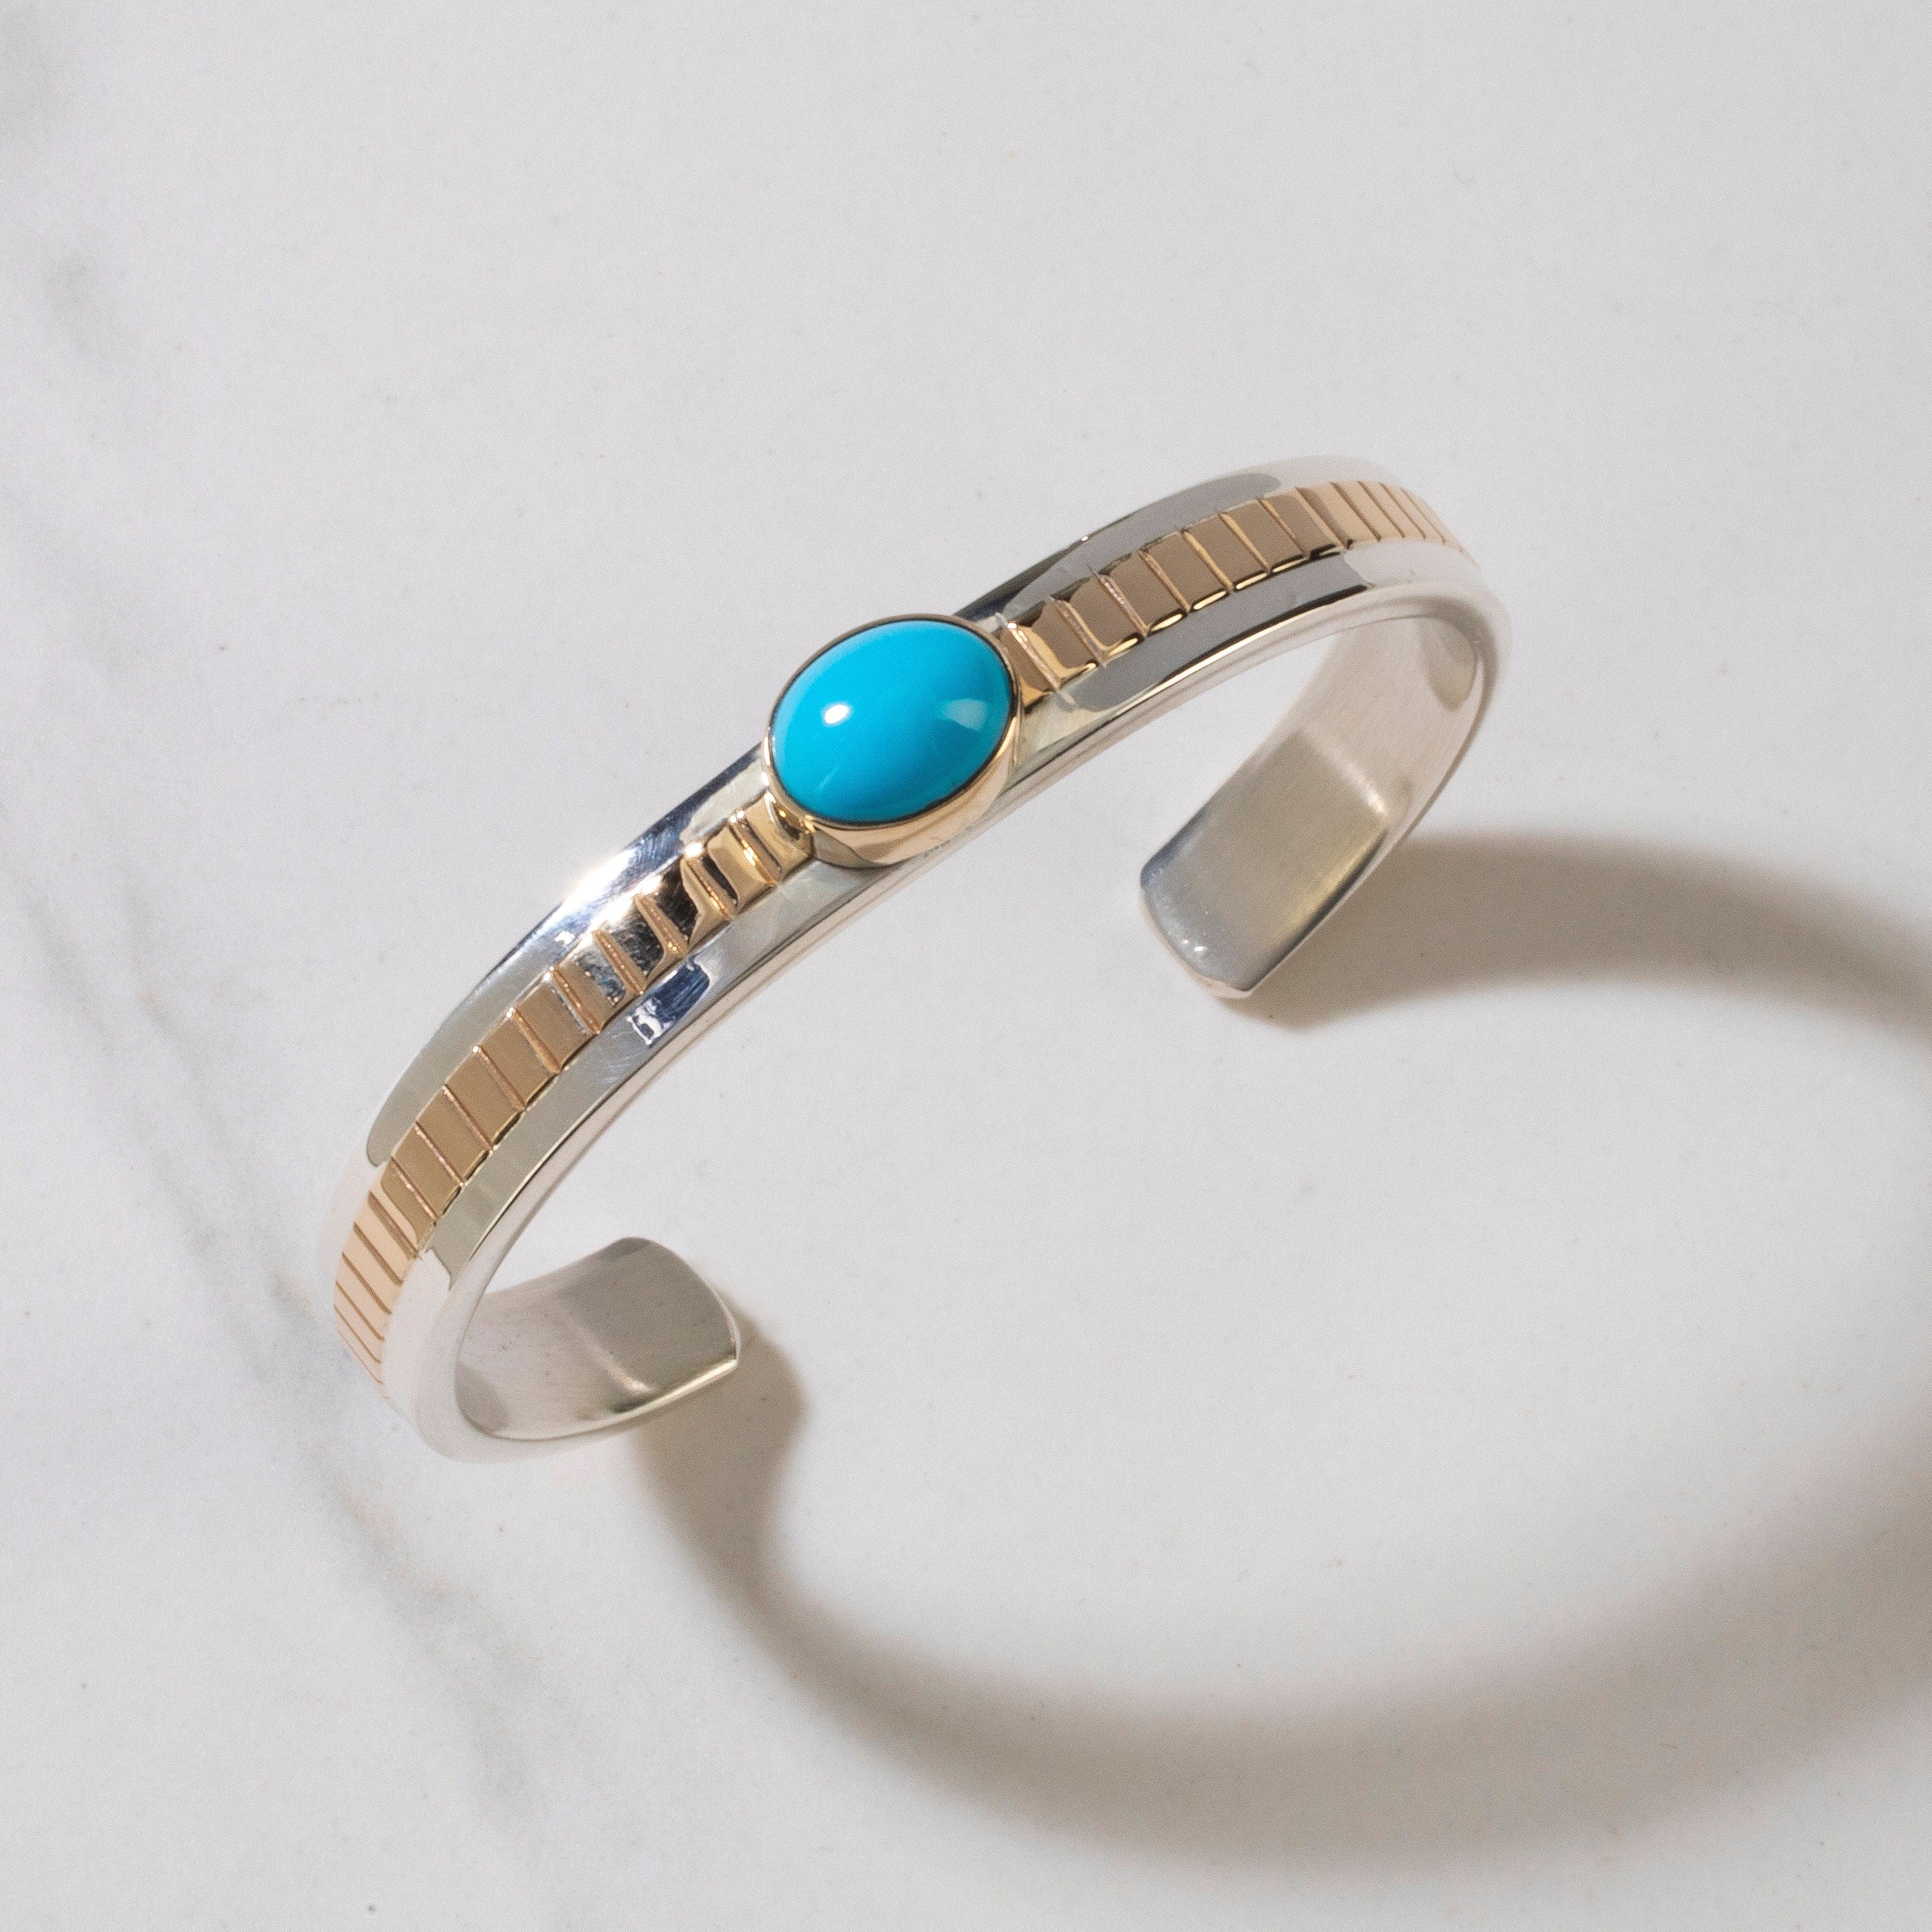 kalifano native american jewelry ray bennett navajo sleeping beauty turquoise 14k gold usa native american made 925 sterling silver cuff nab2800 007 39492609540290